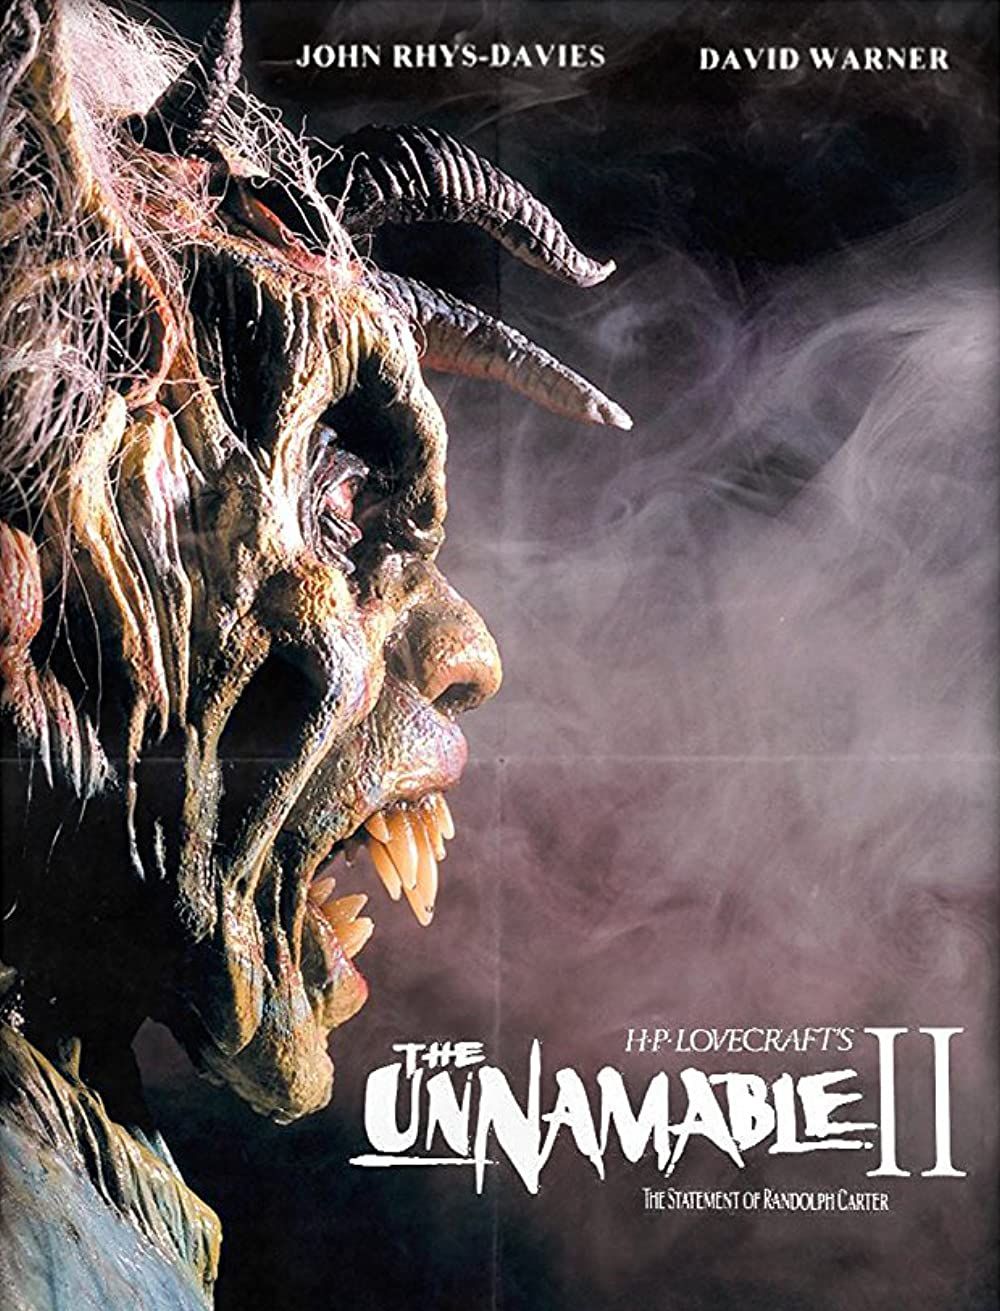 The Unnamable II The Statement of Randolph Carter (1992)